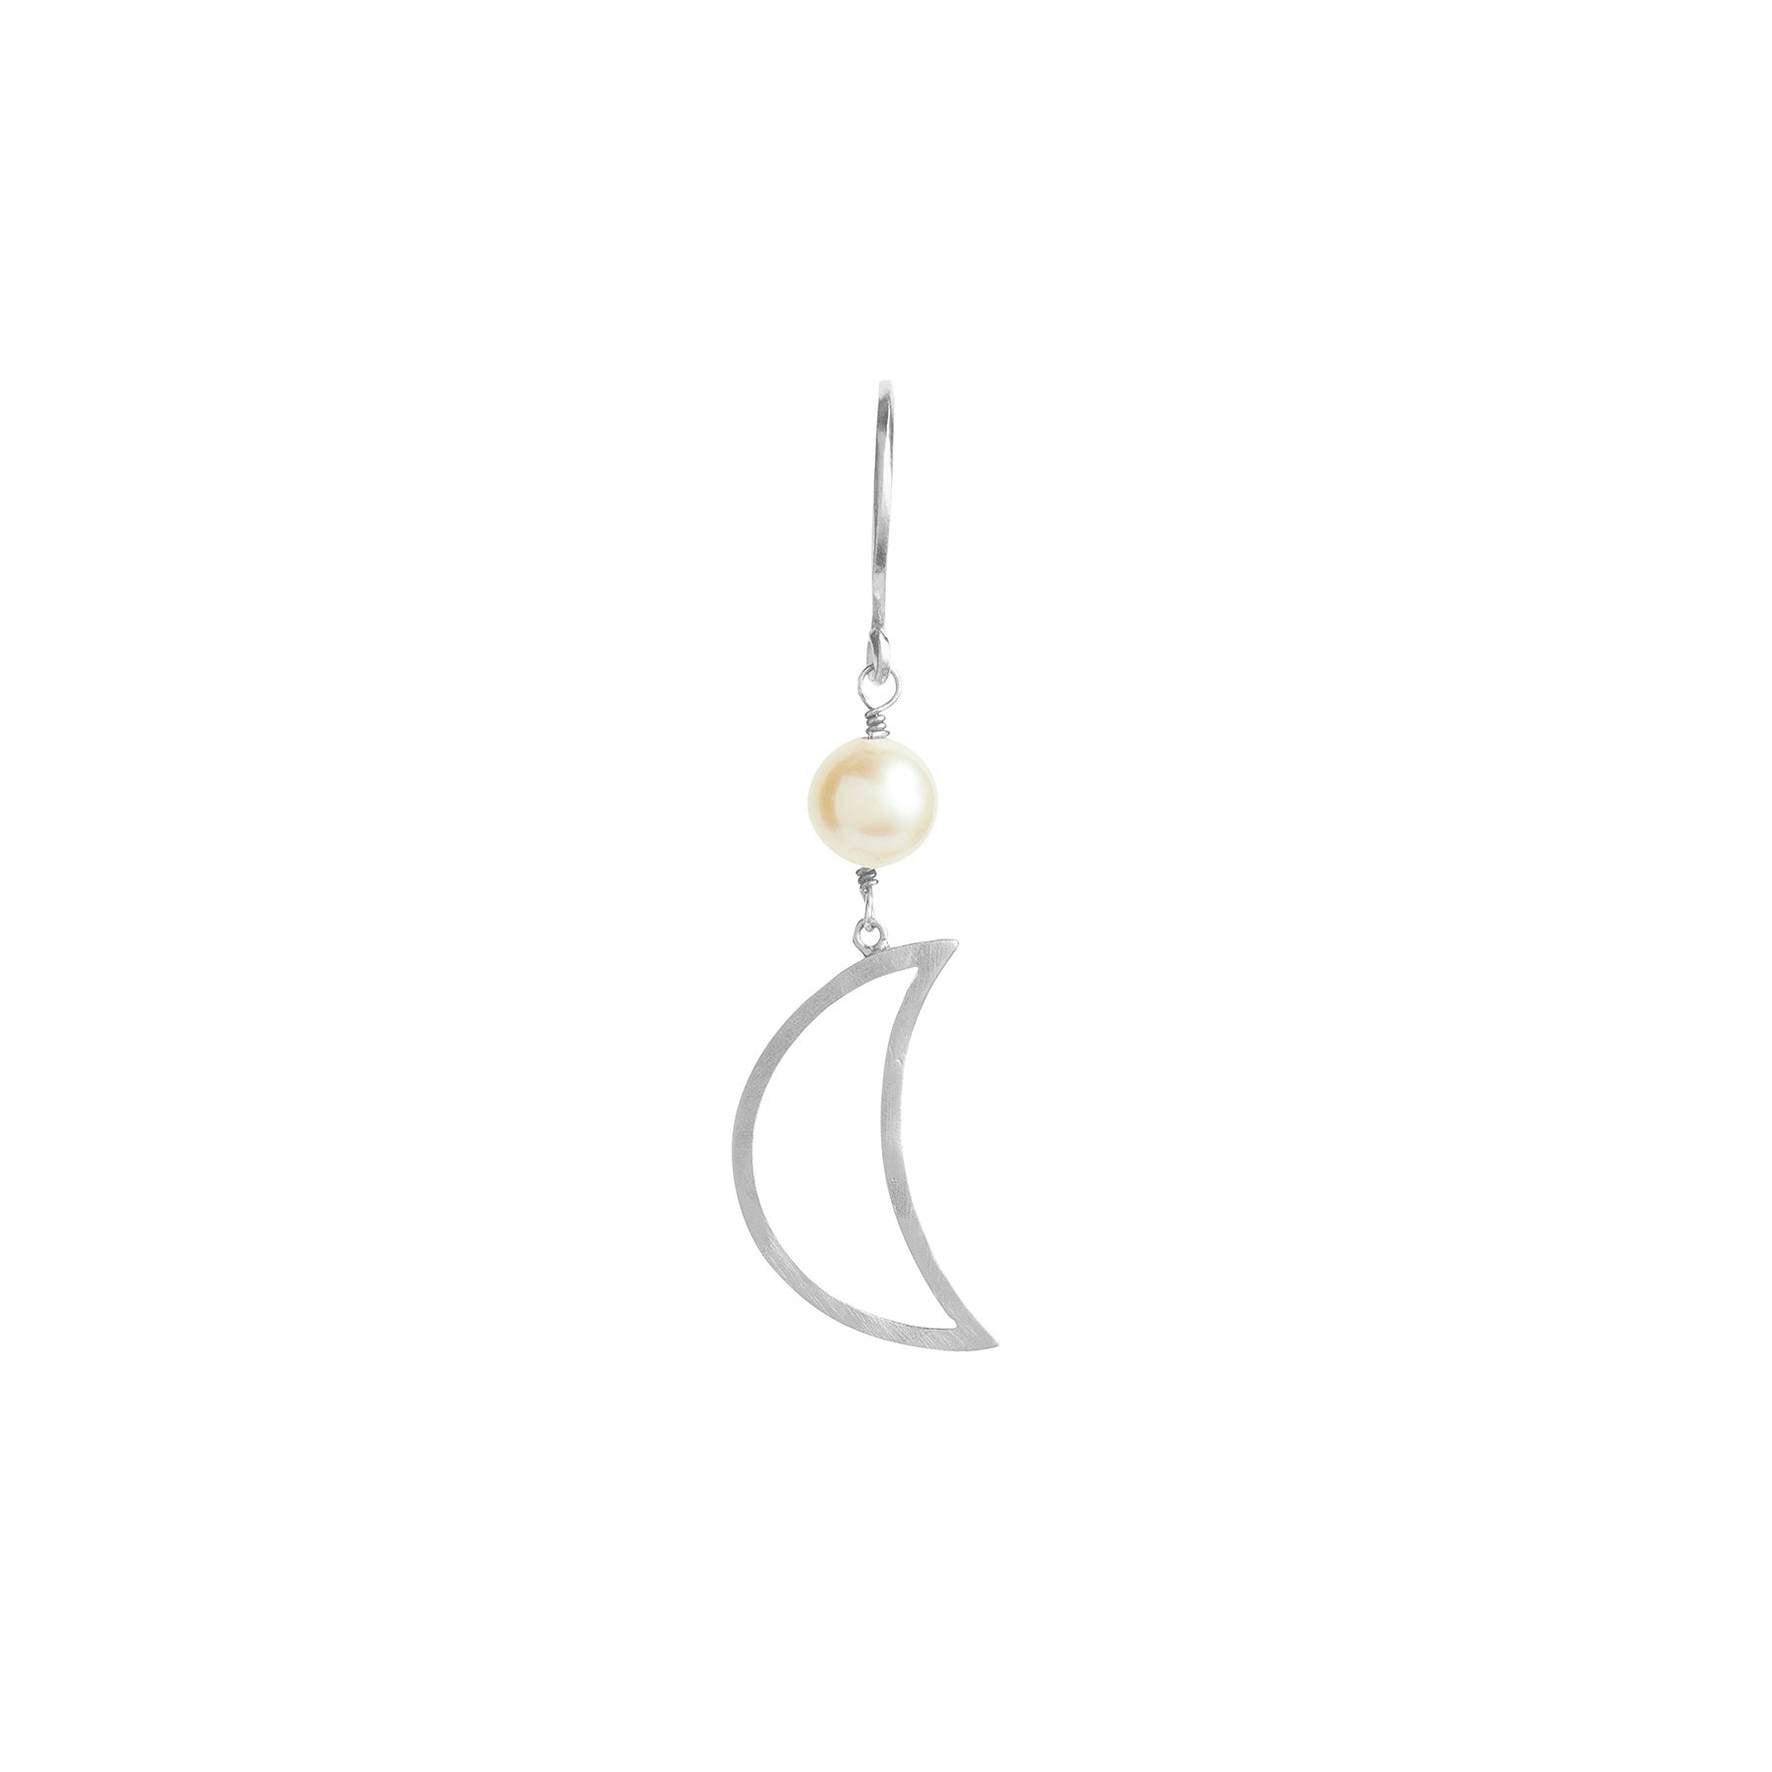 Bella Moon Earring With Pearl from STINE A Jewelry in Silver Sterling 925